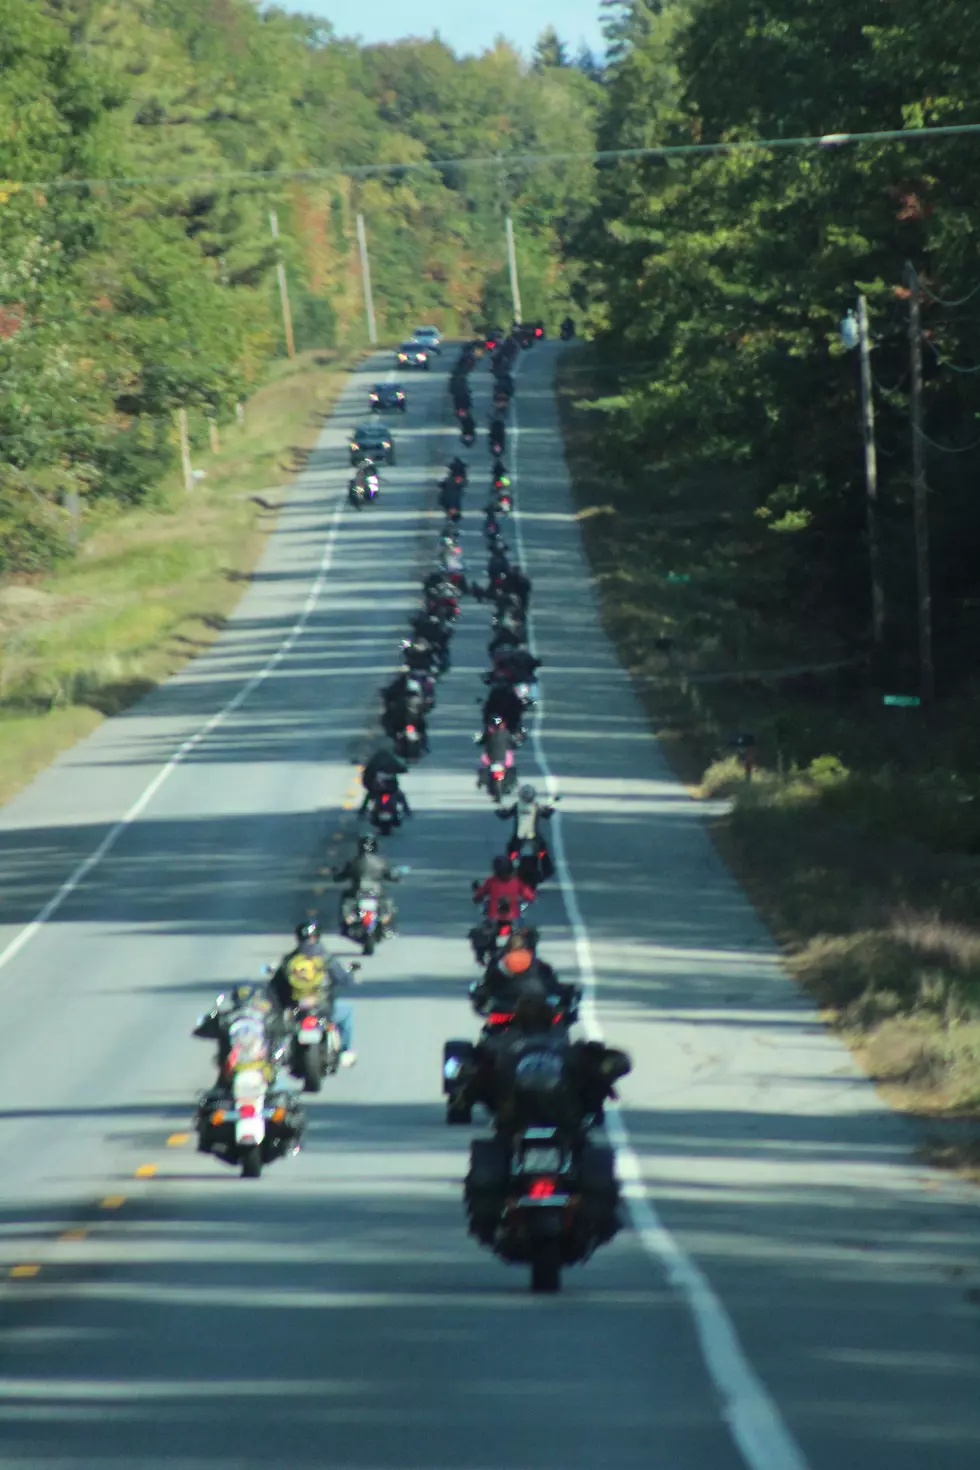 Bikers for Boobies II to Help Mainers Fighting Breast Cancer